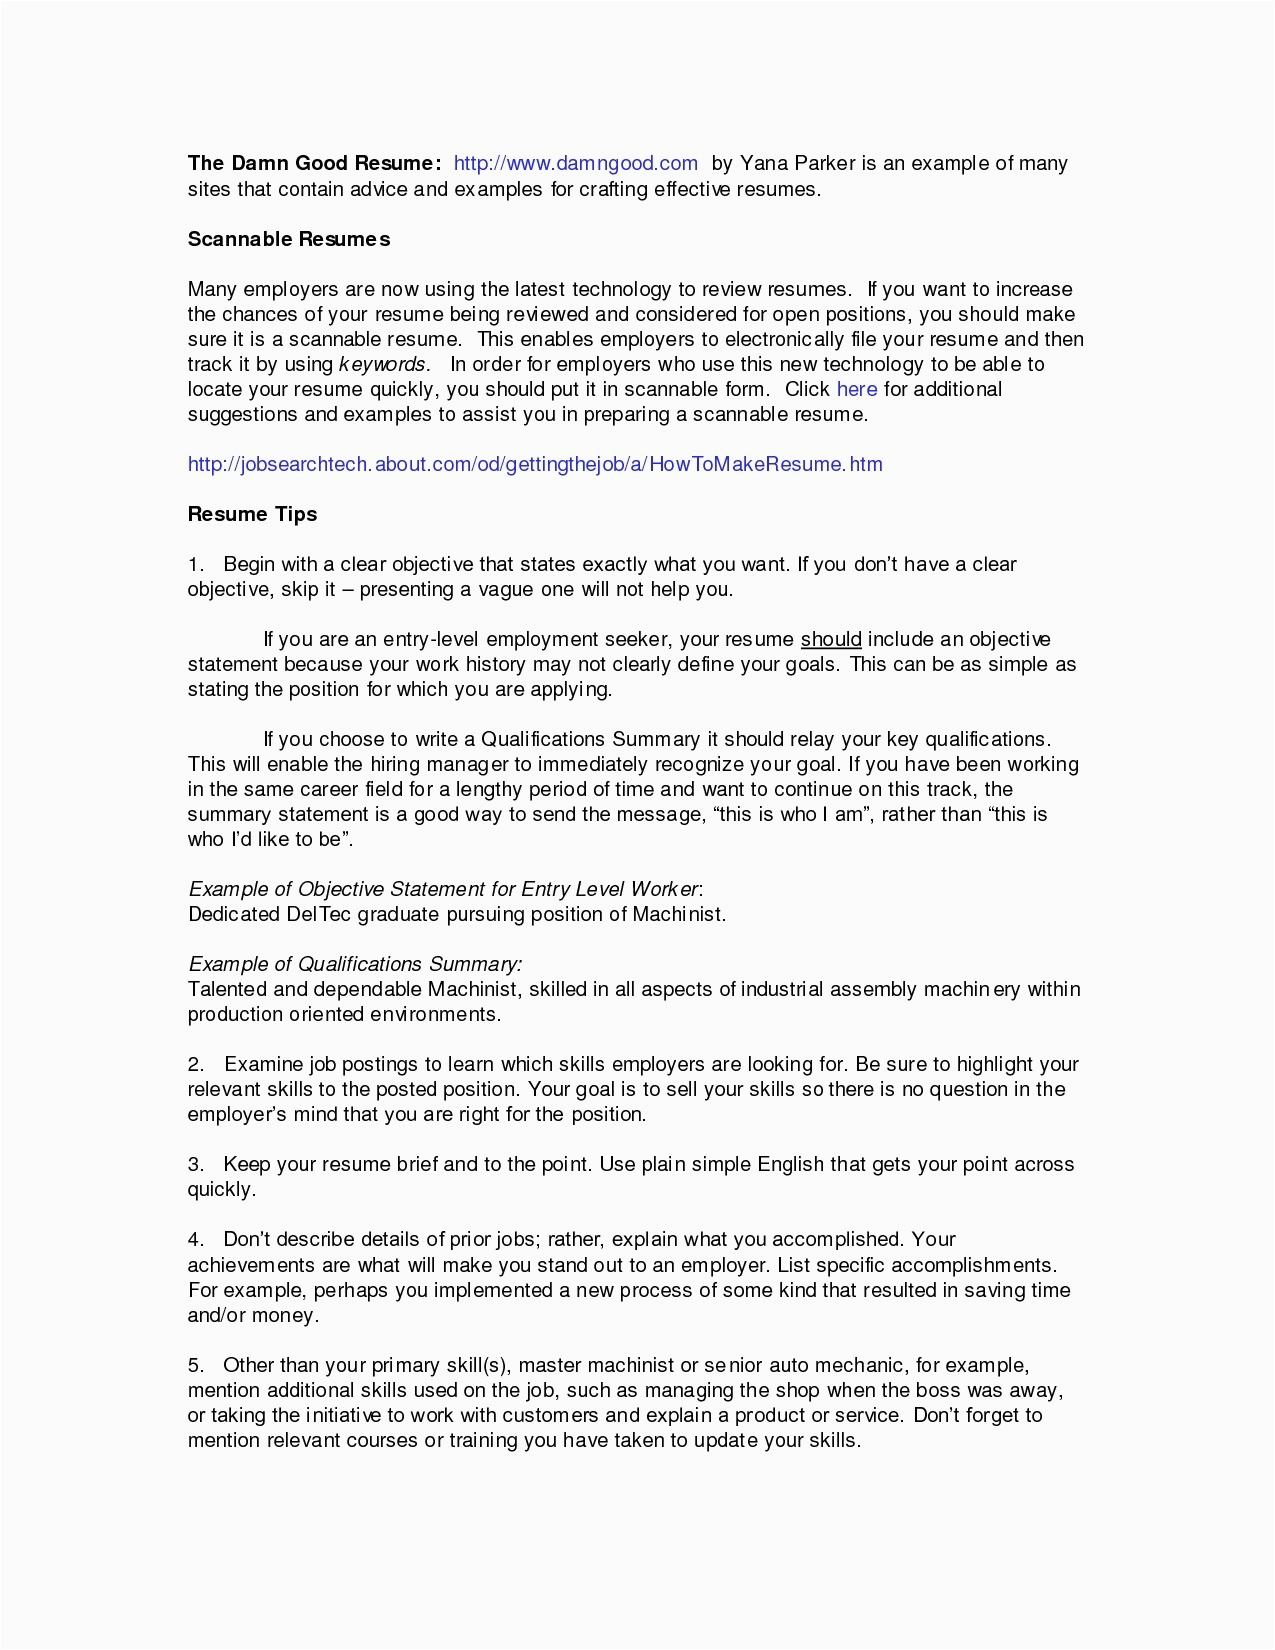 Skills and Interest In Resume Sample 12 Resume Skills and Interests Examples Radaircars